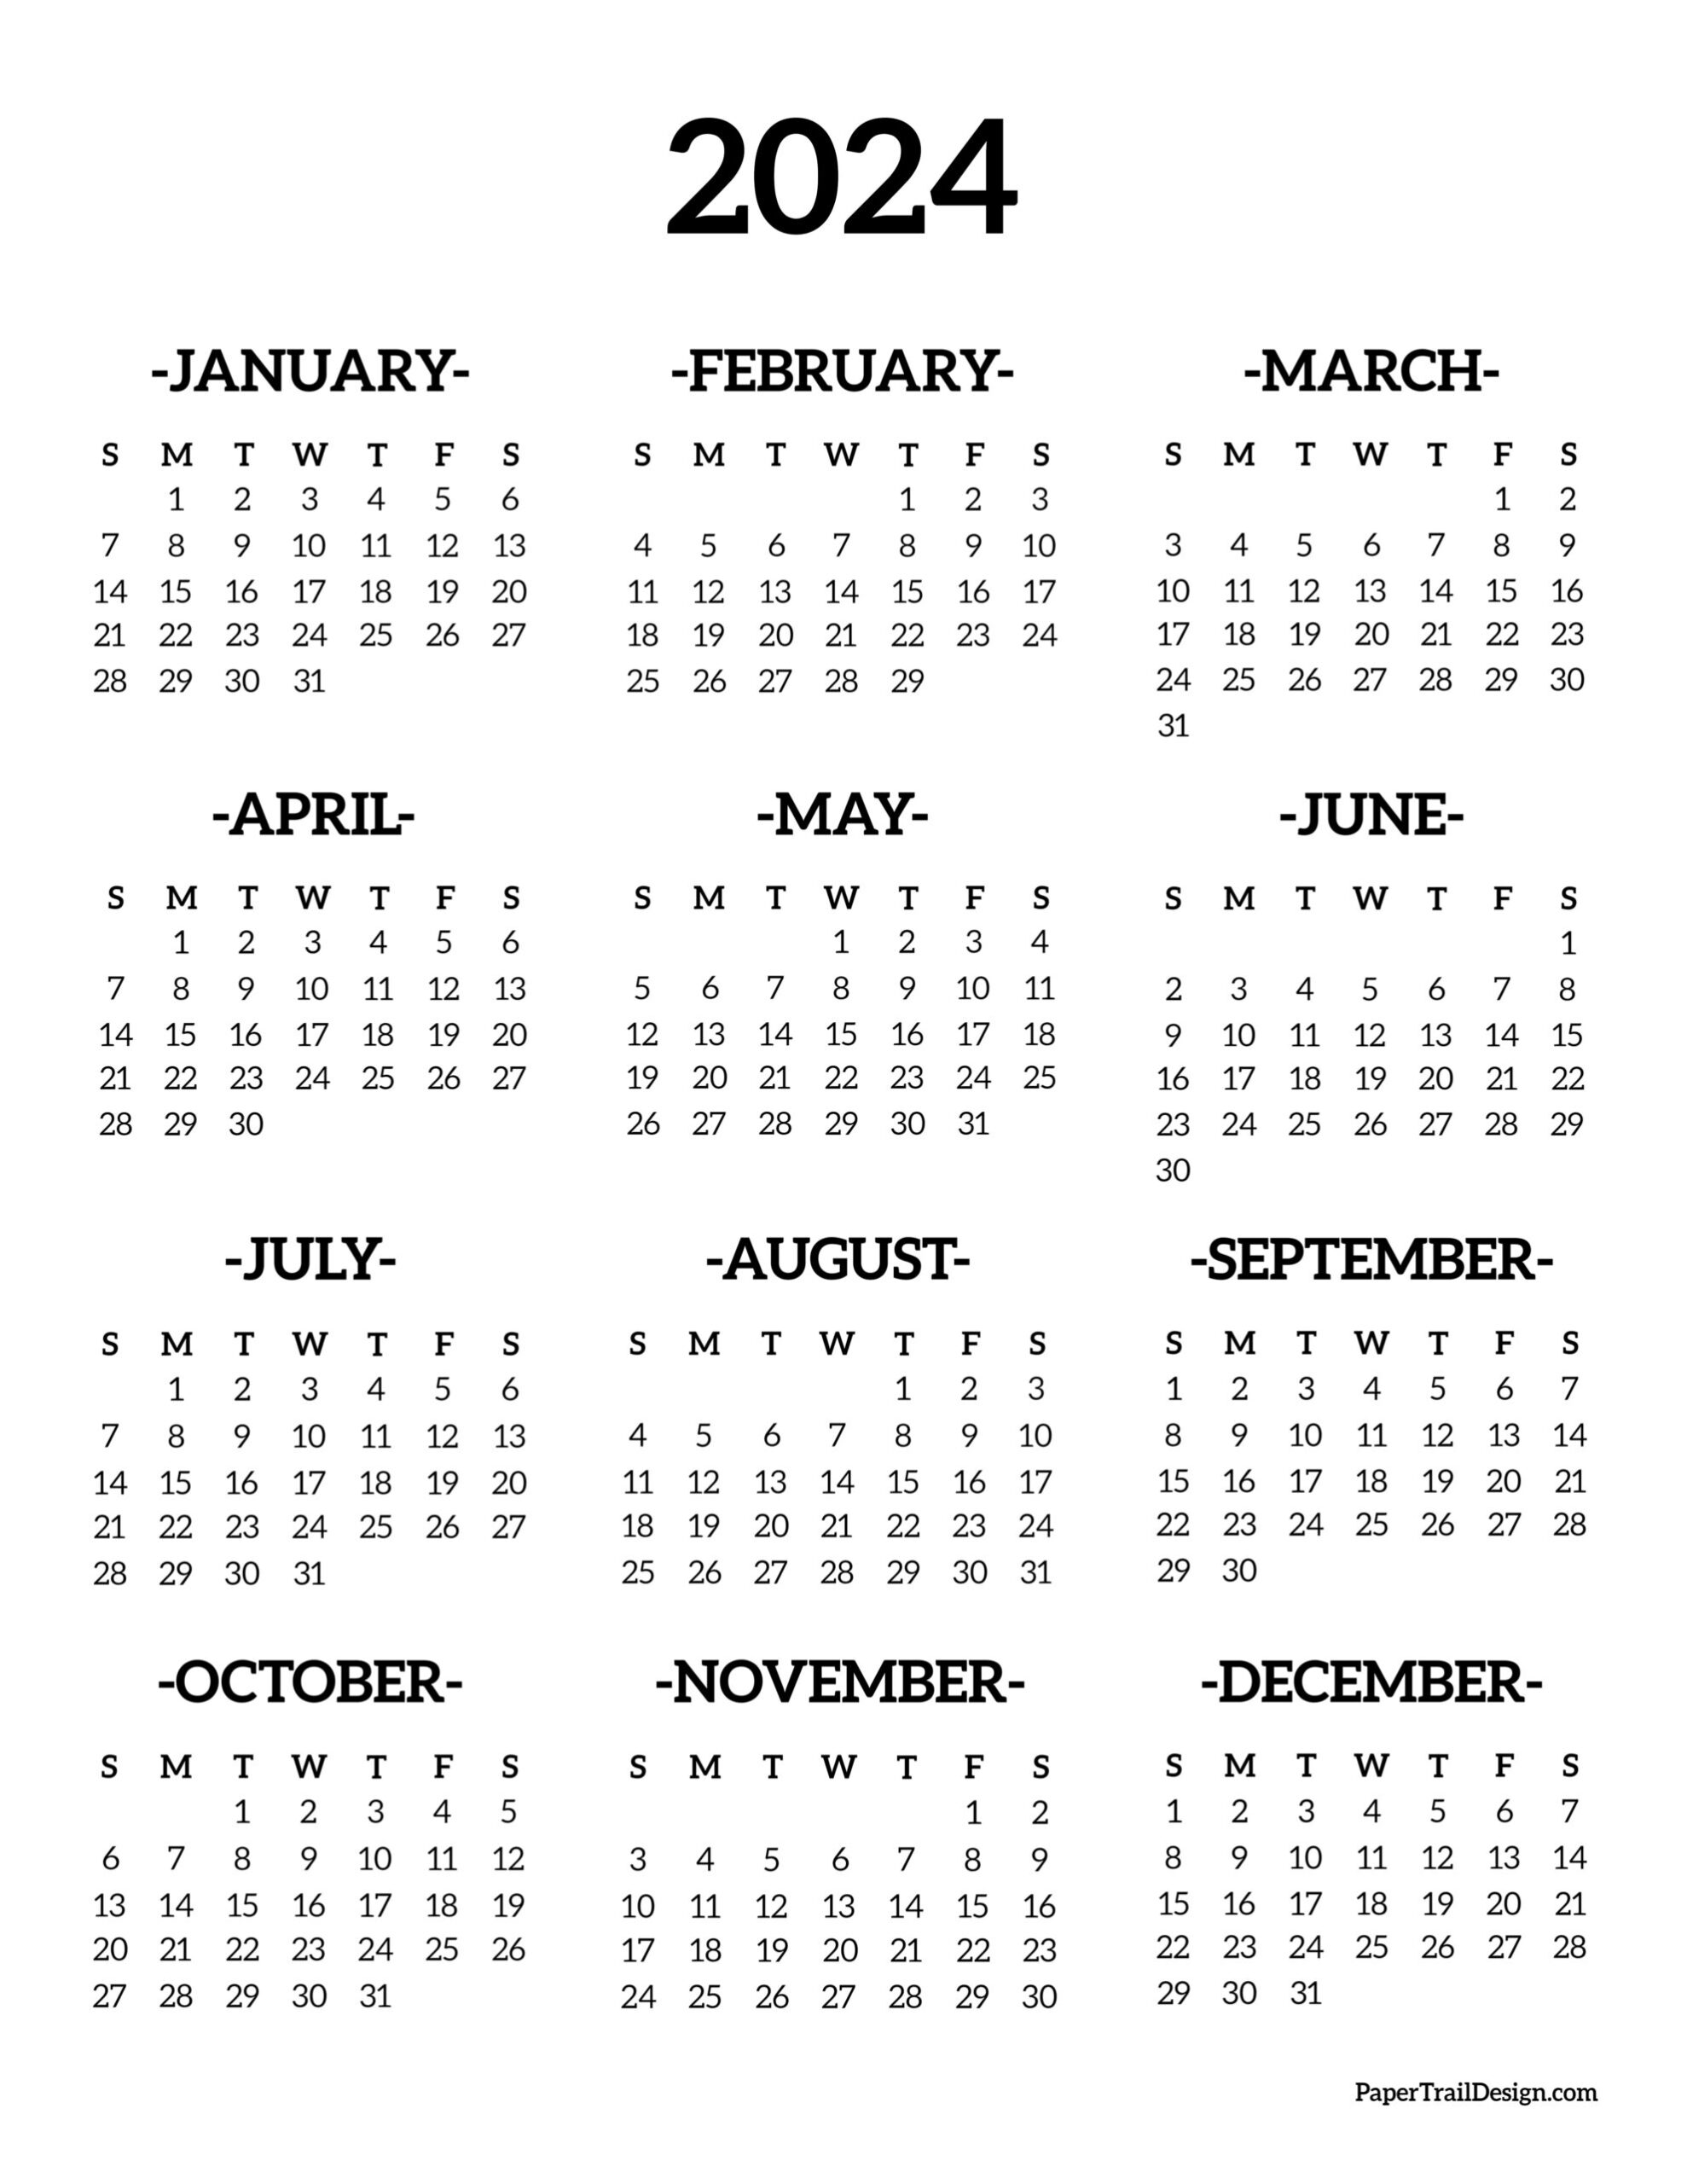 Calendar 2024 Printable One Page - Paper Trail Design for Calendar Pages 2024 Printable